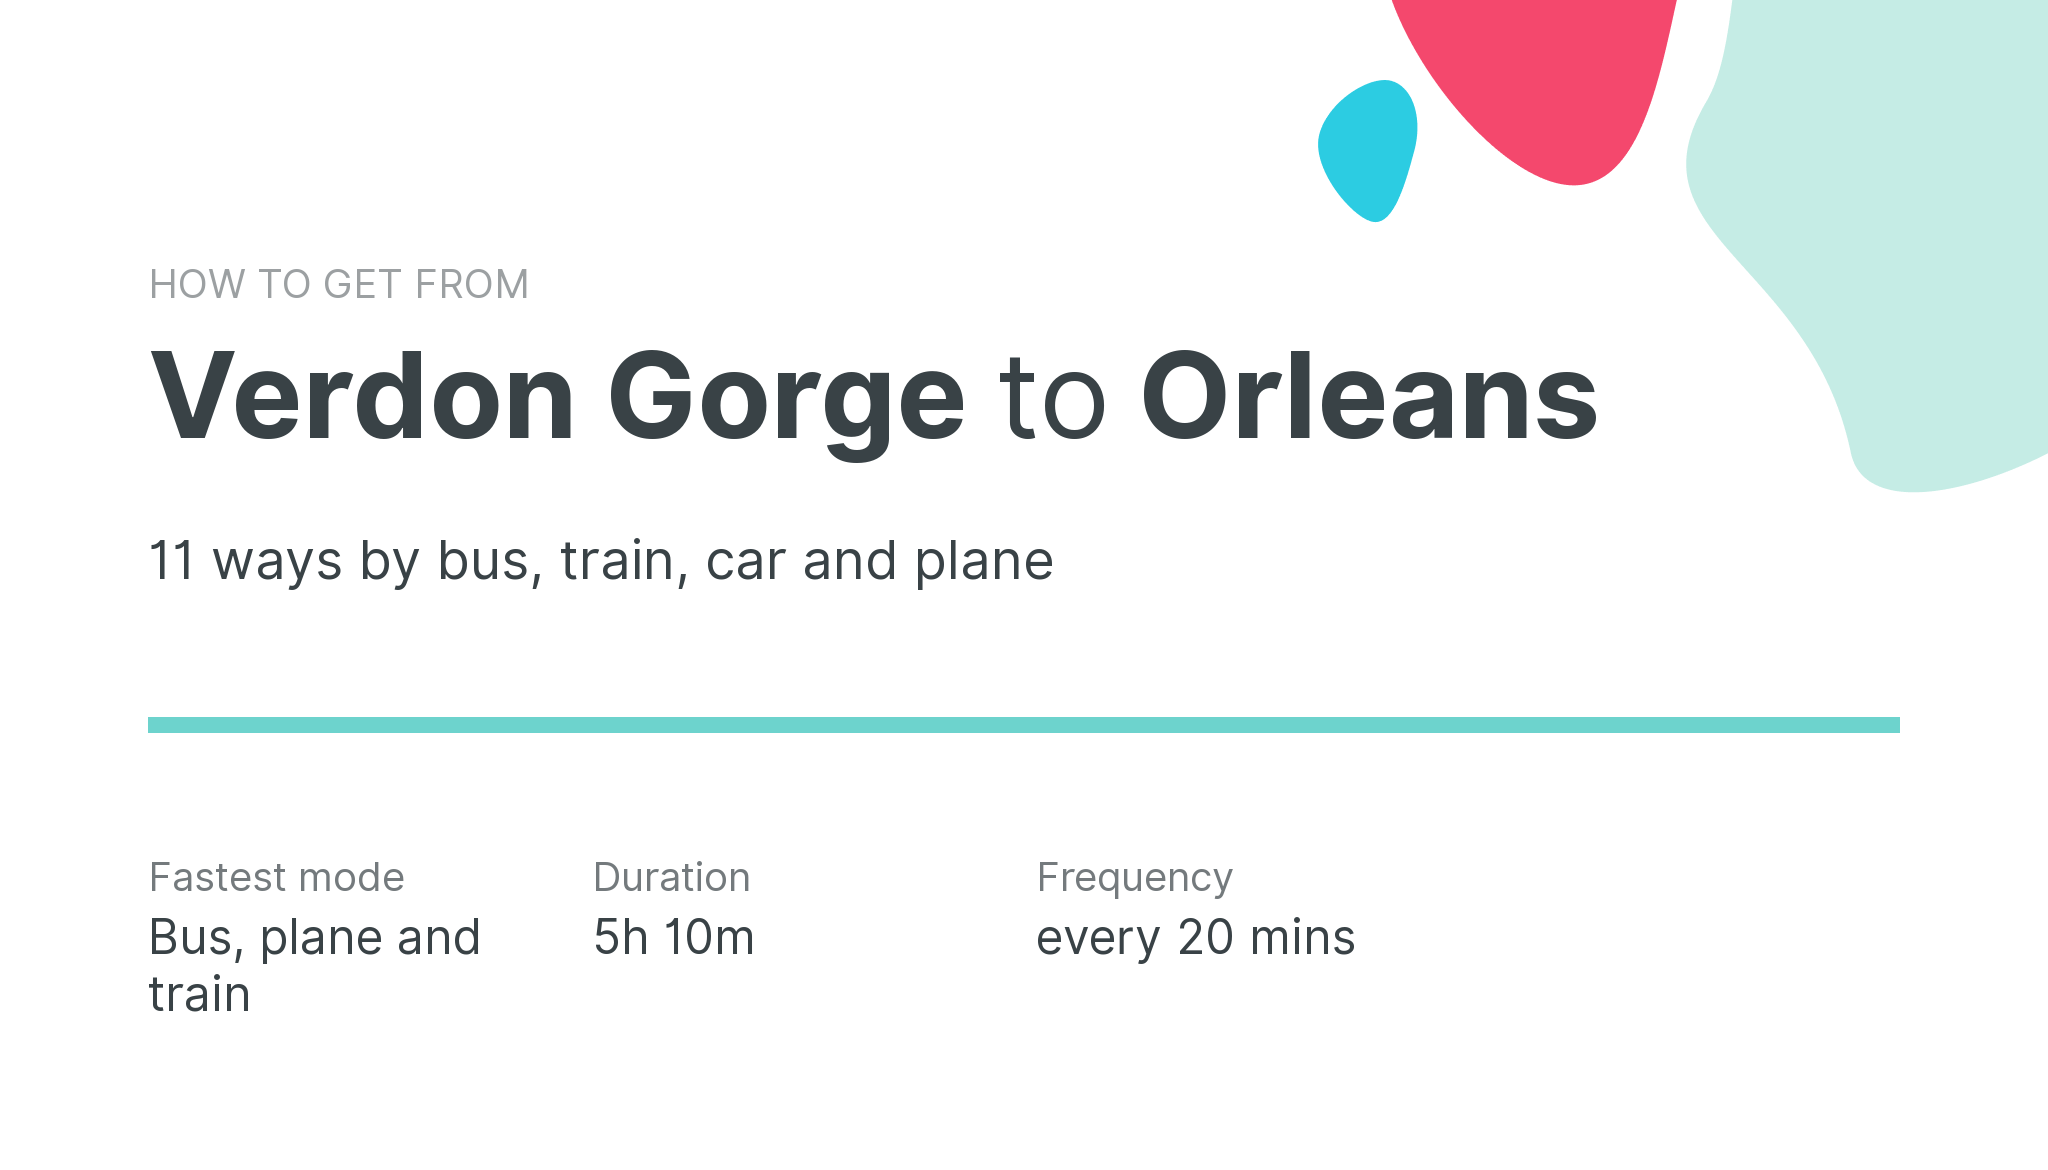 How do I get from Verdon Gorge to Orleans